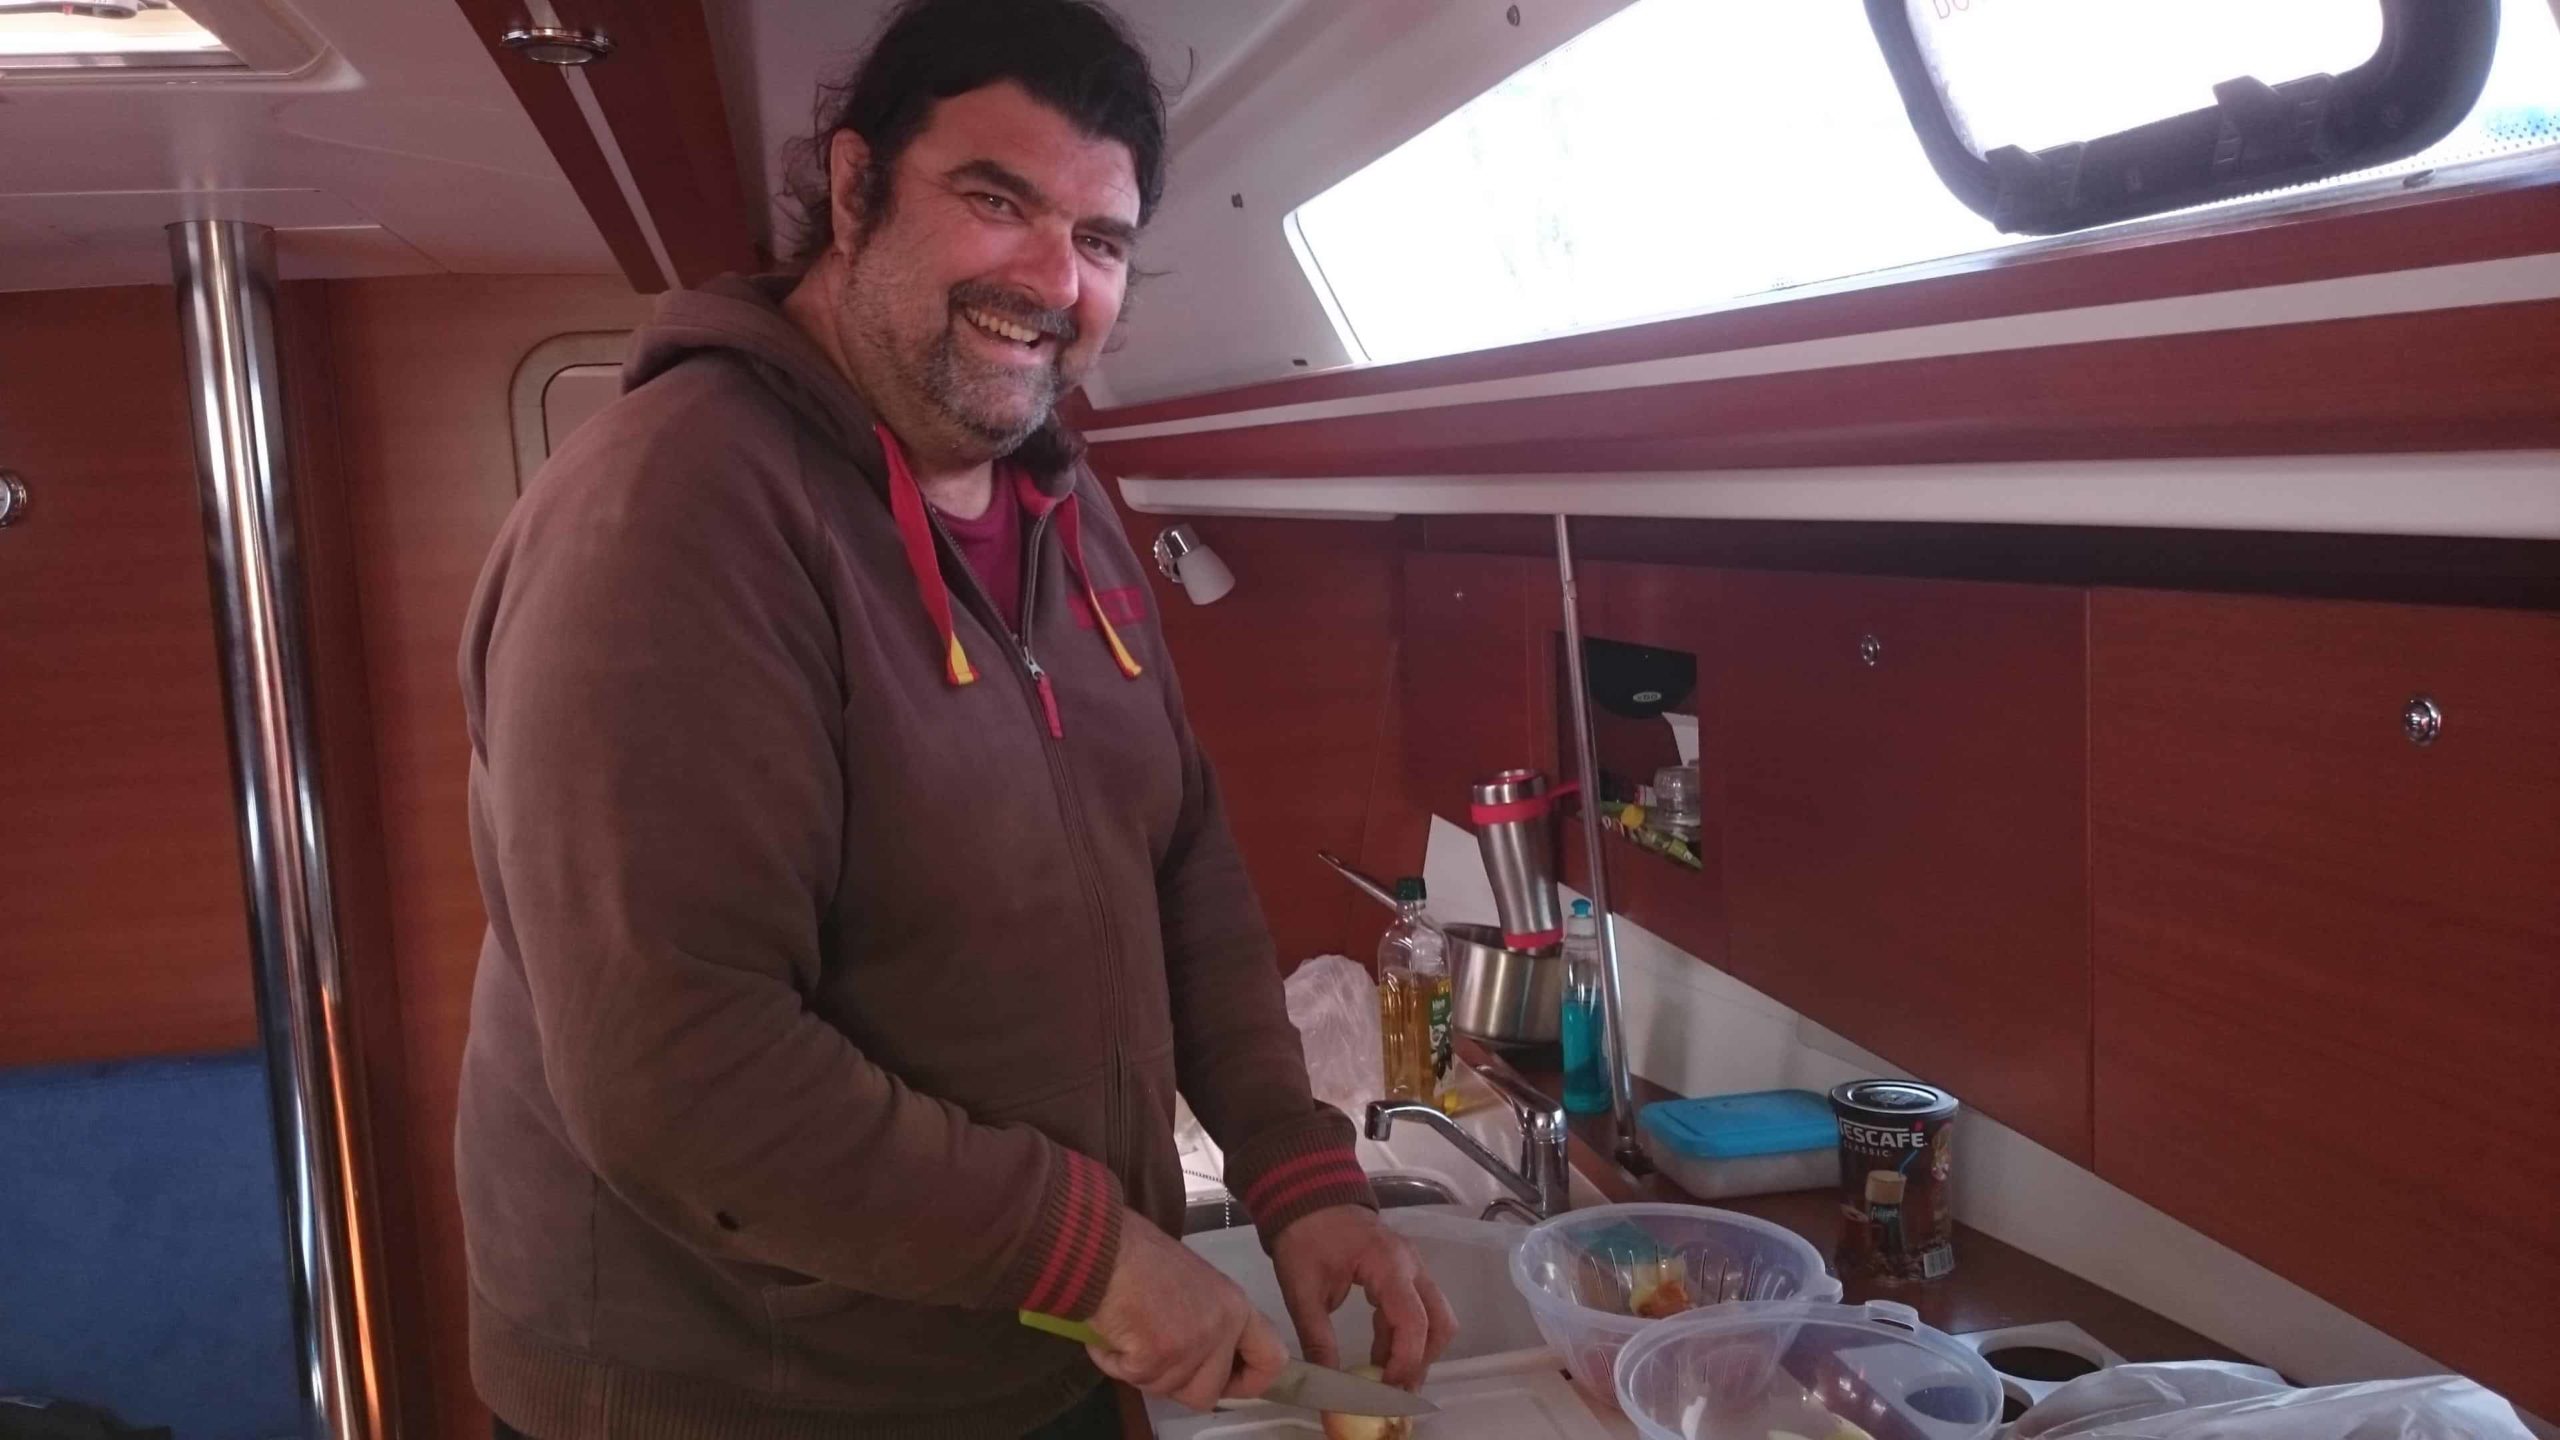 Professional yacht delivery skipper in the galley preparing lunch for the crew